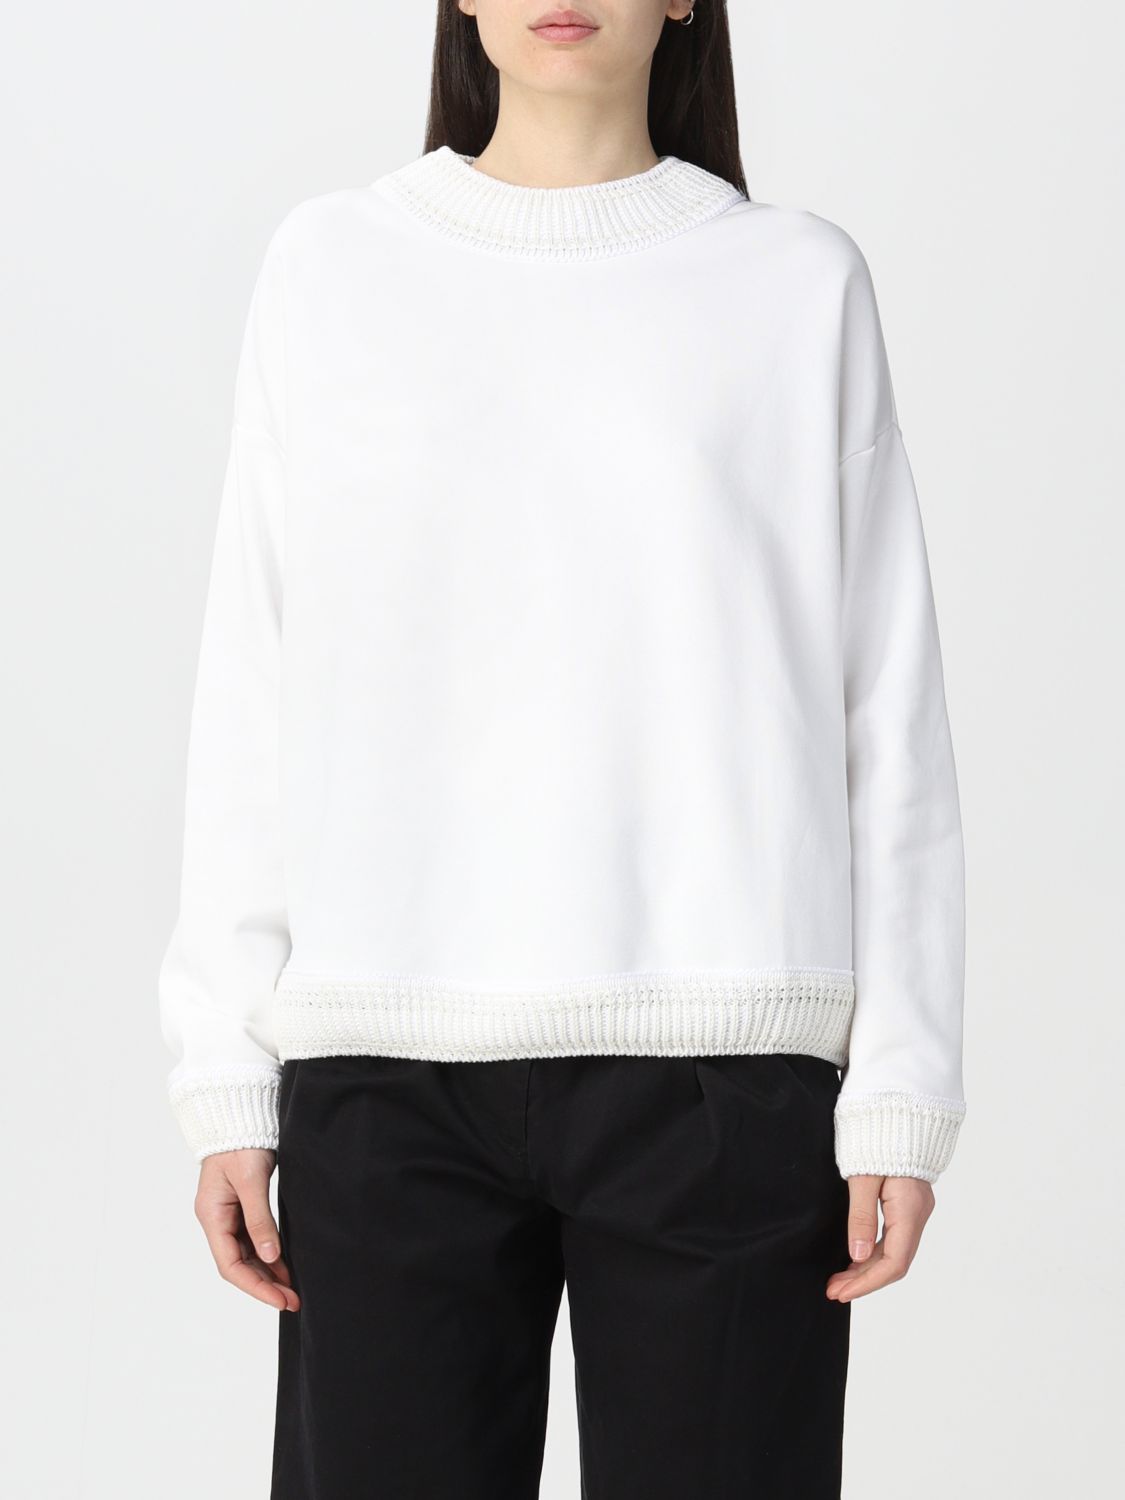 ERMANNO FIRENZE: sweater for woman - White | Ermanno Firenze sweater ...